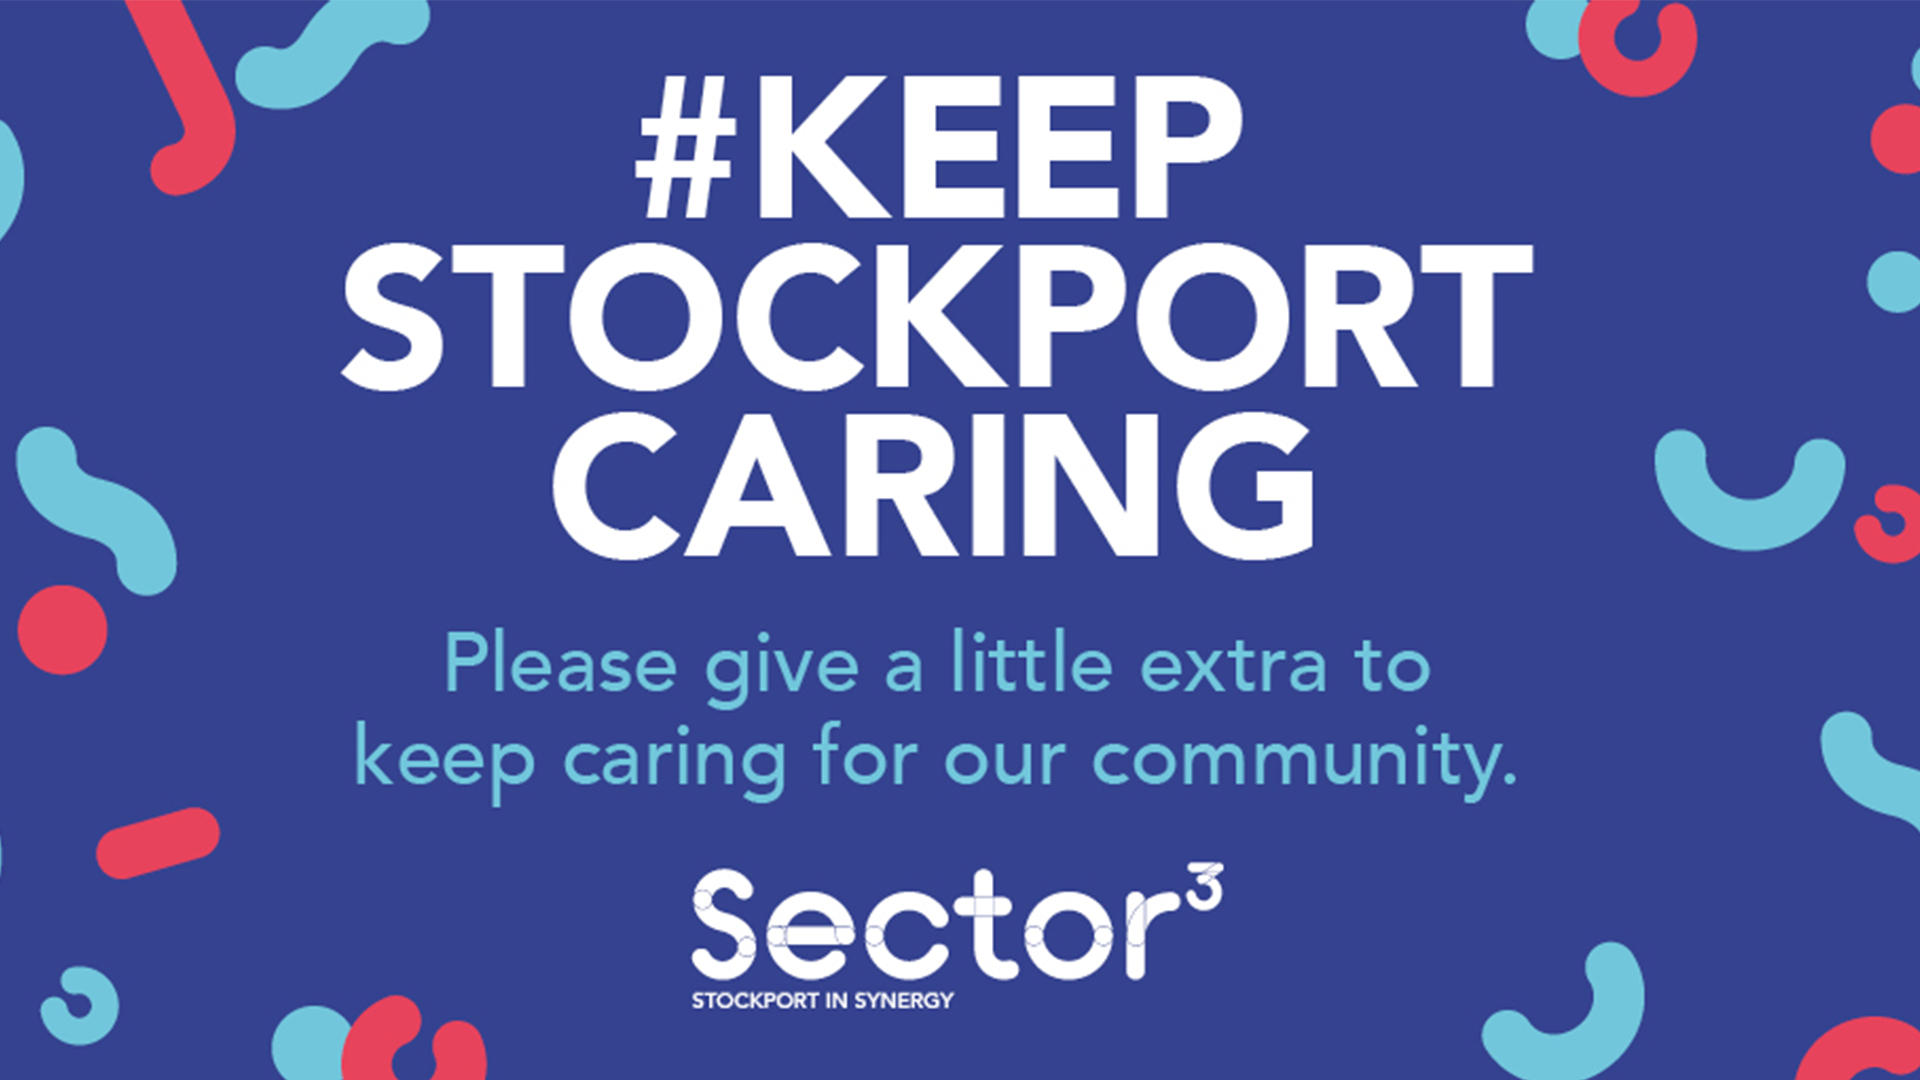 New charity fundraising website and campaign launched to ‘Keep Stockport Caring’